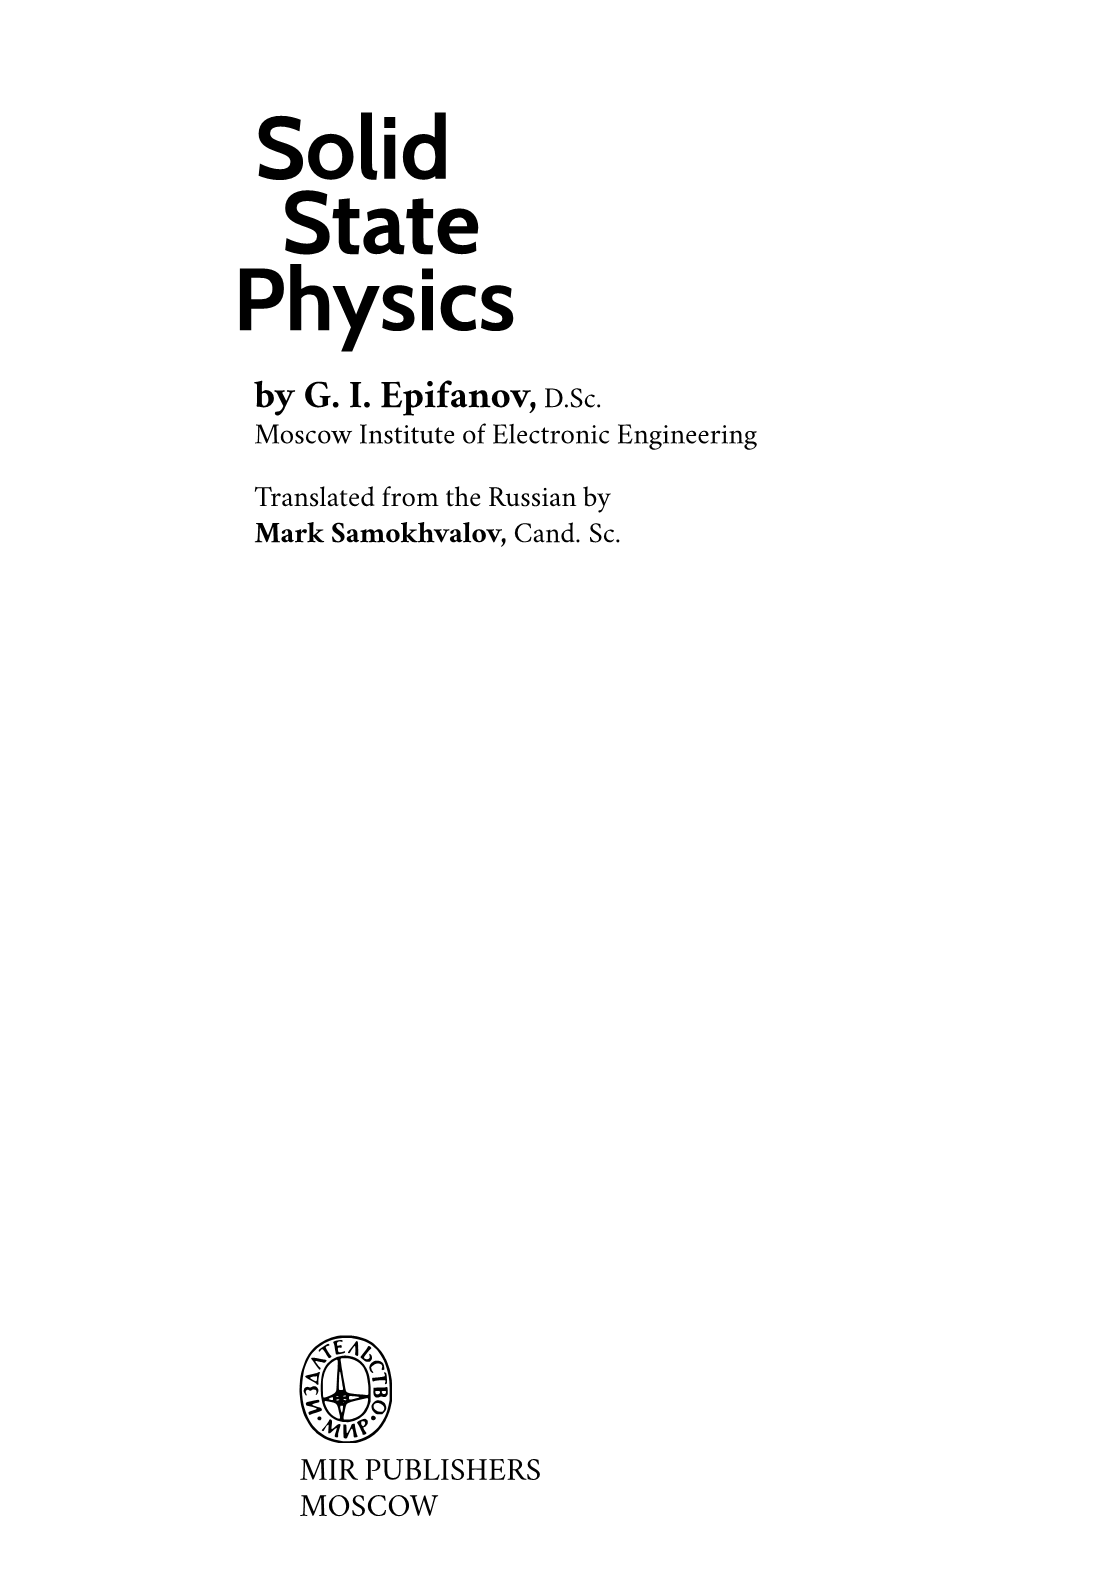 epifanov_solid_state_physics_5.png